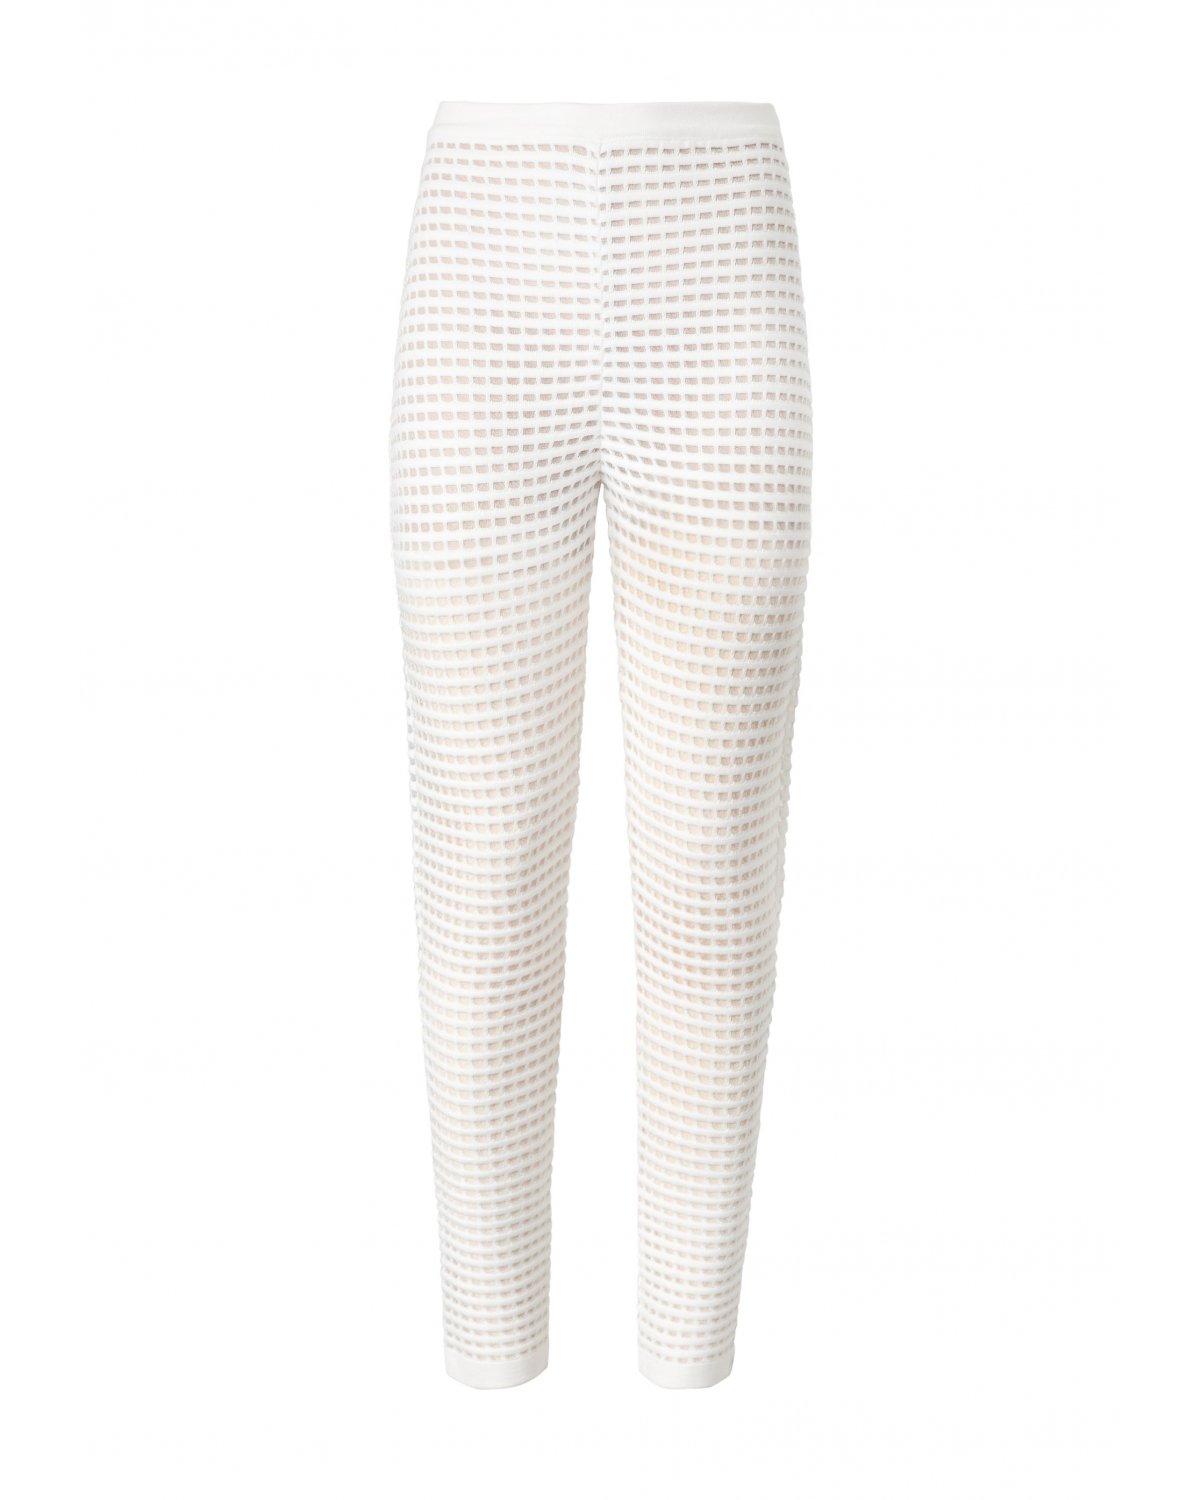 Knit iconic pants | gregoracci-carousel-1, gregoracci-carousel-2, Iconic Capsule Collection, 73_74 | Genny